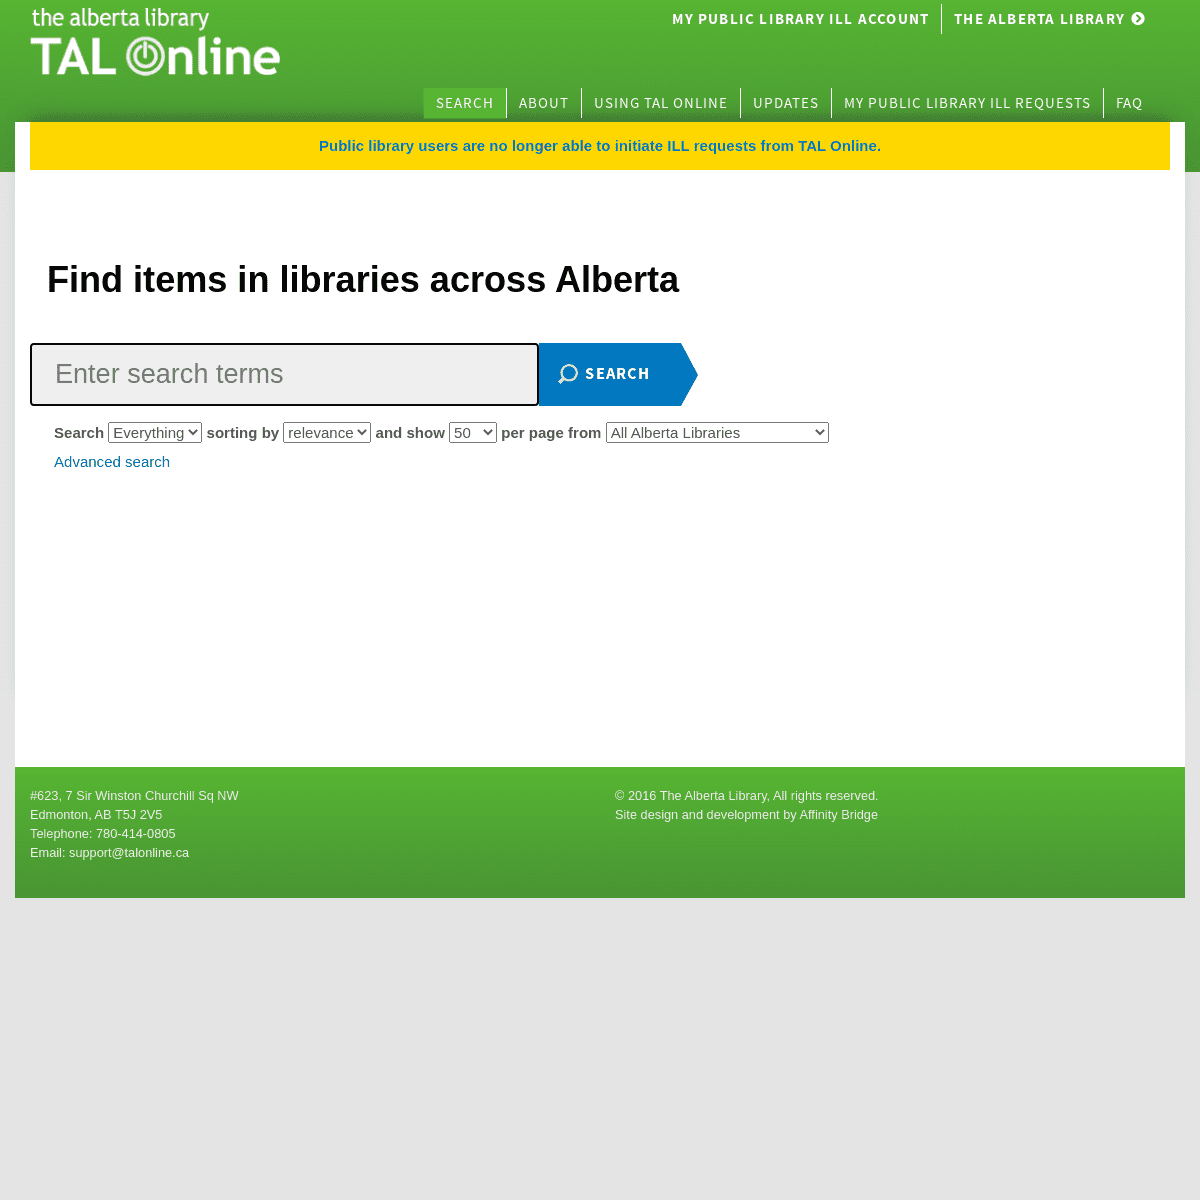 A complete backup of https://talonline.ca